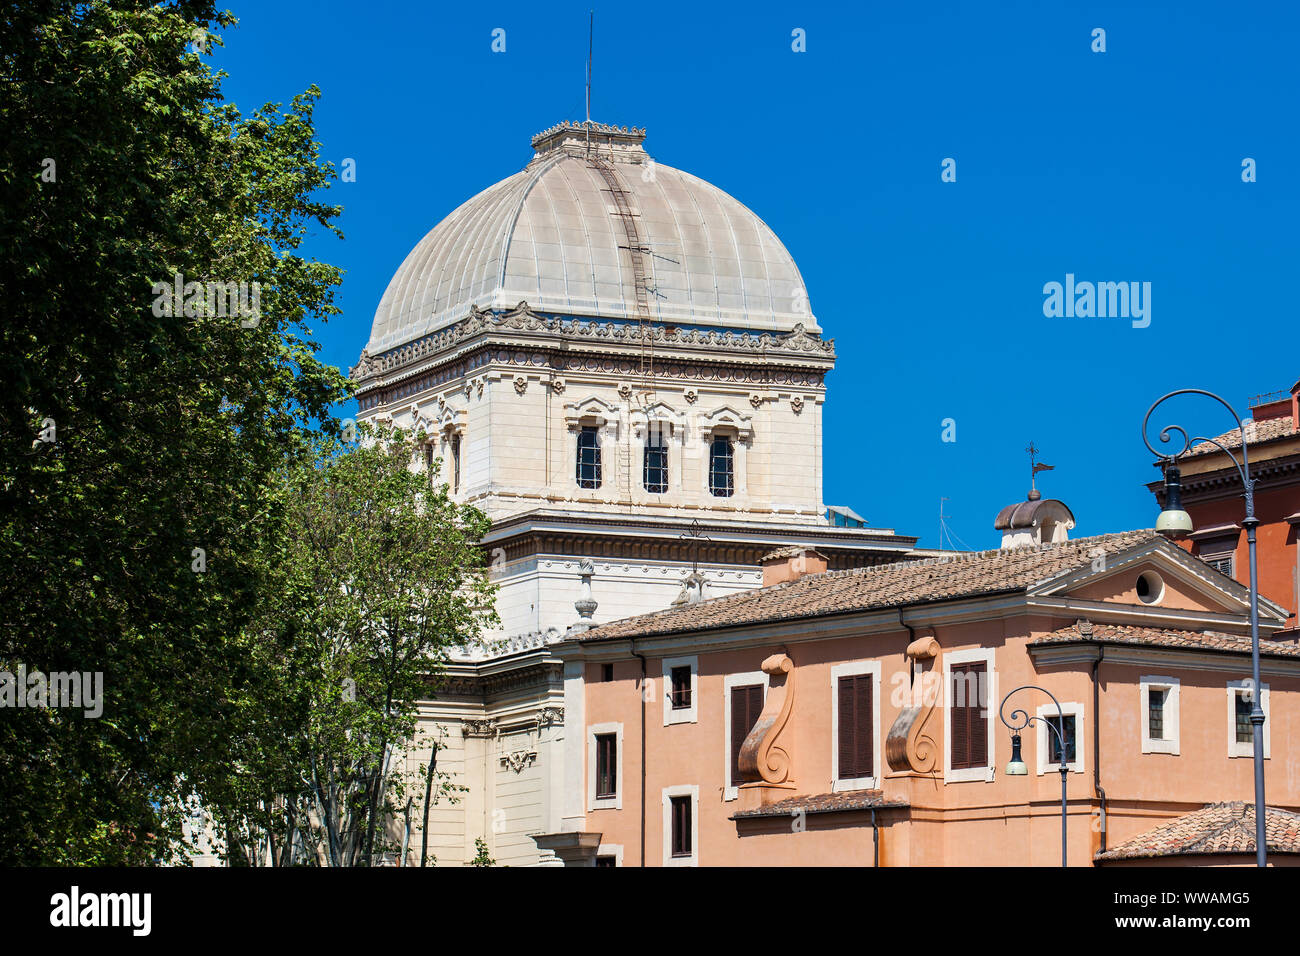 Dome of the Great Synagogue of Rome built on 1904 Stock Photo